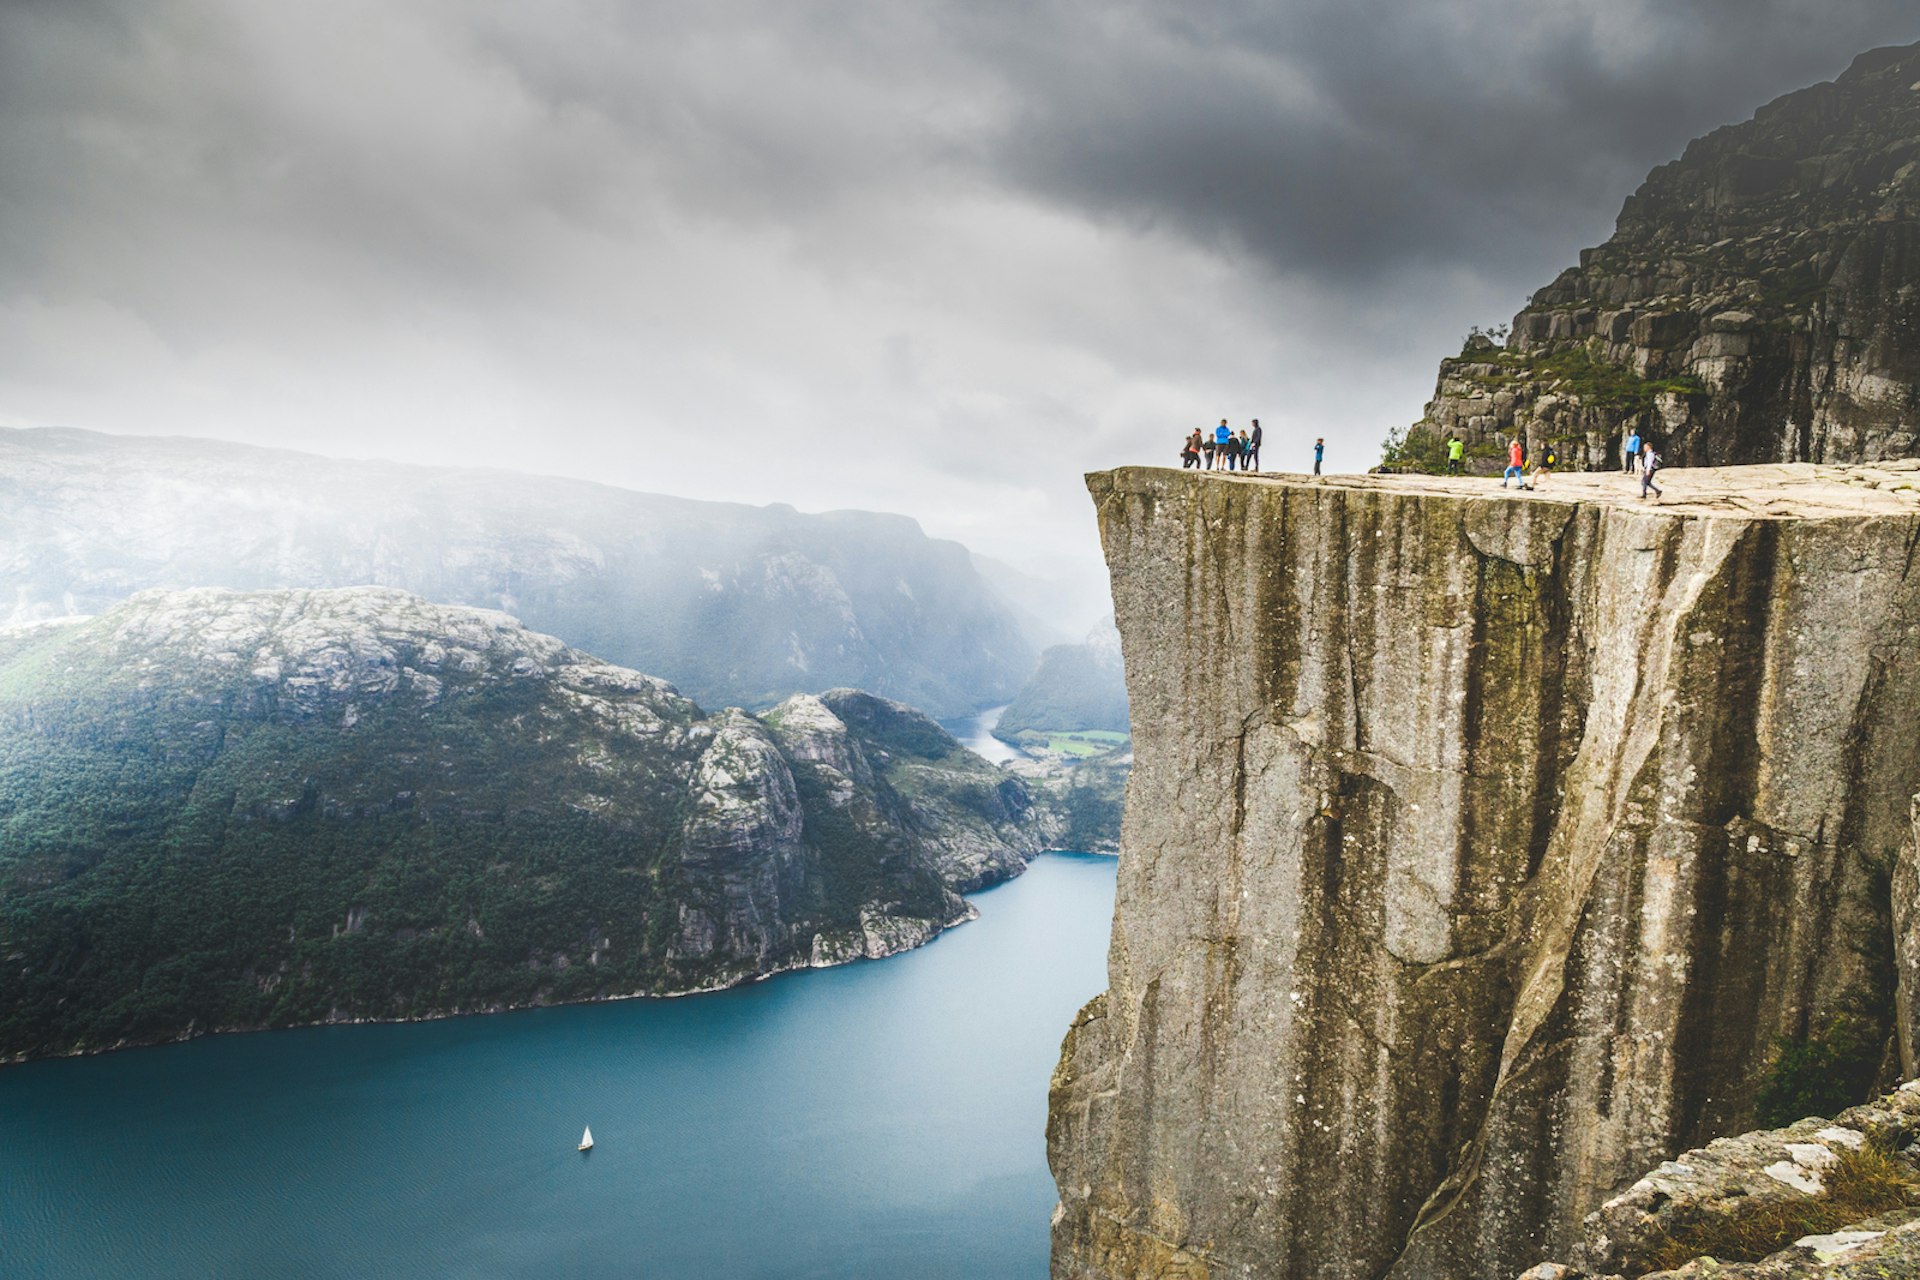 A group of tourists taking in the view from Preikestolen – or 'Pulpit Rock' – in Norway © Ihor_Tailwind / Getty Images